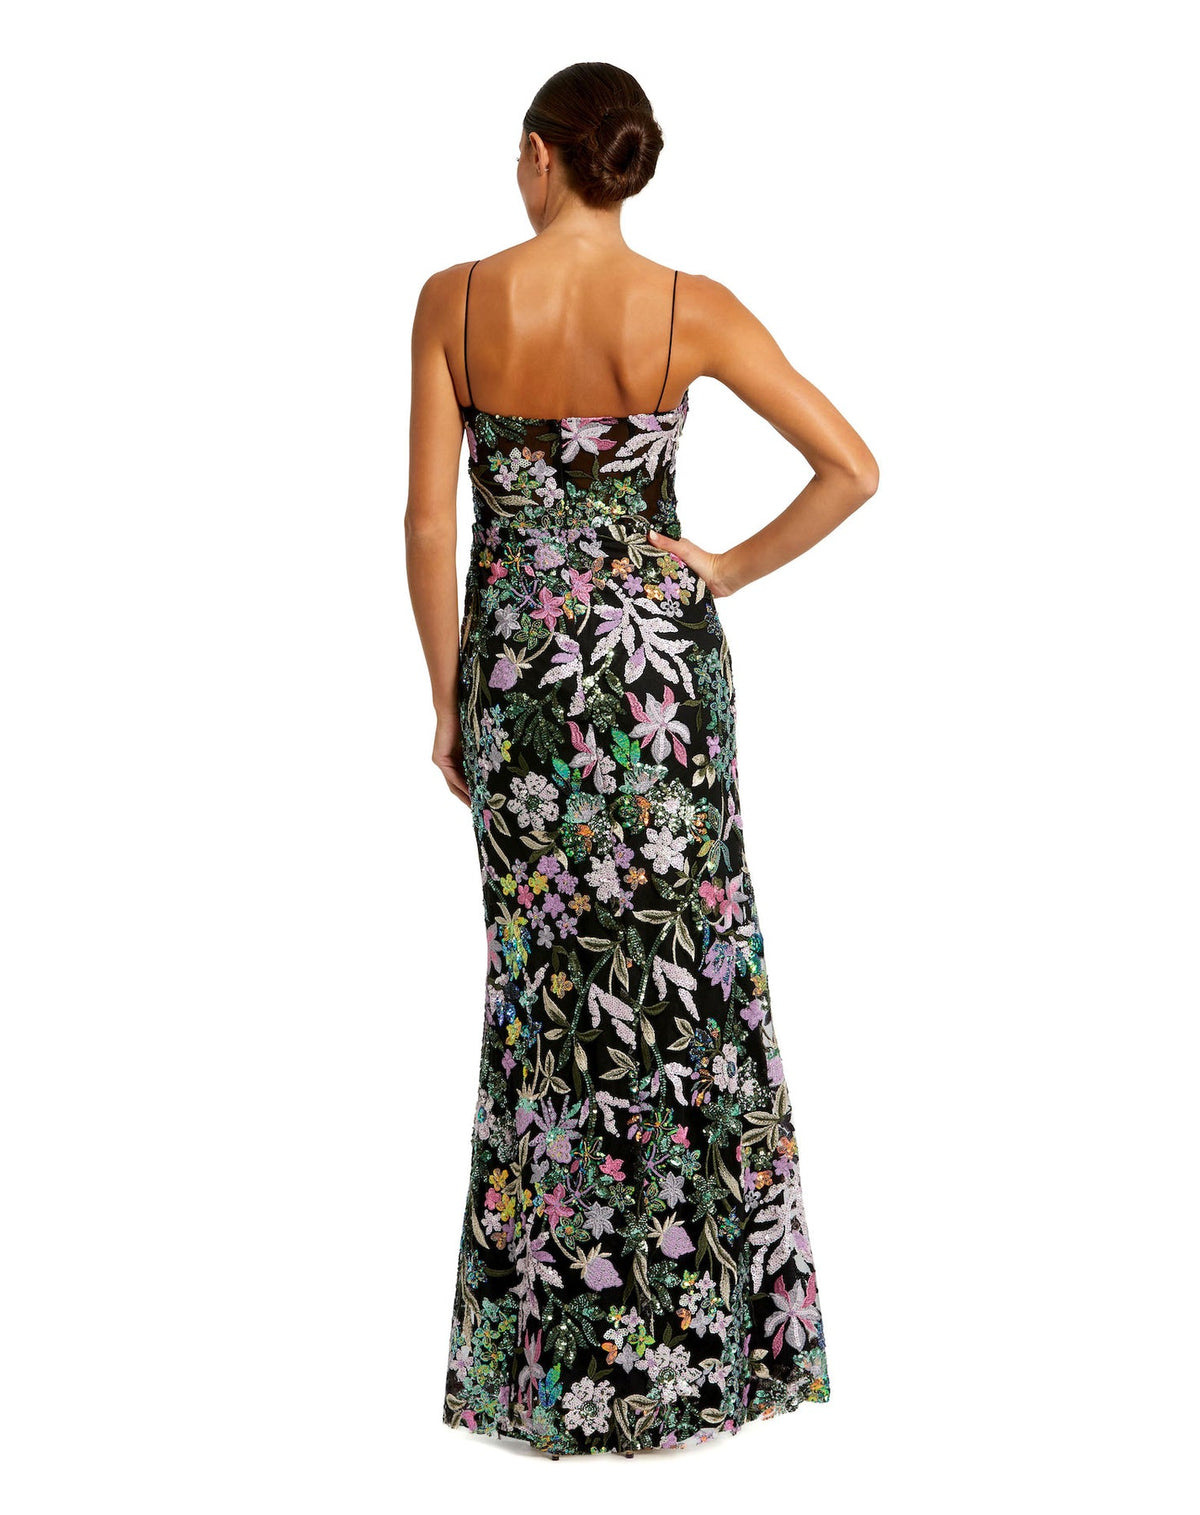 Mac Duggal, Floral Embroidered Sweetheart Gown - Black, Style #49827 back view